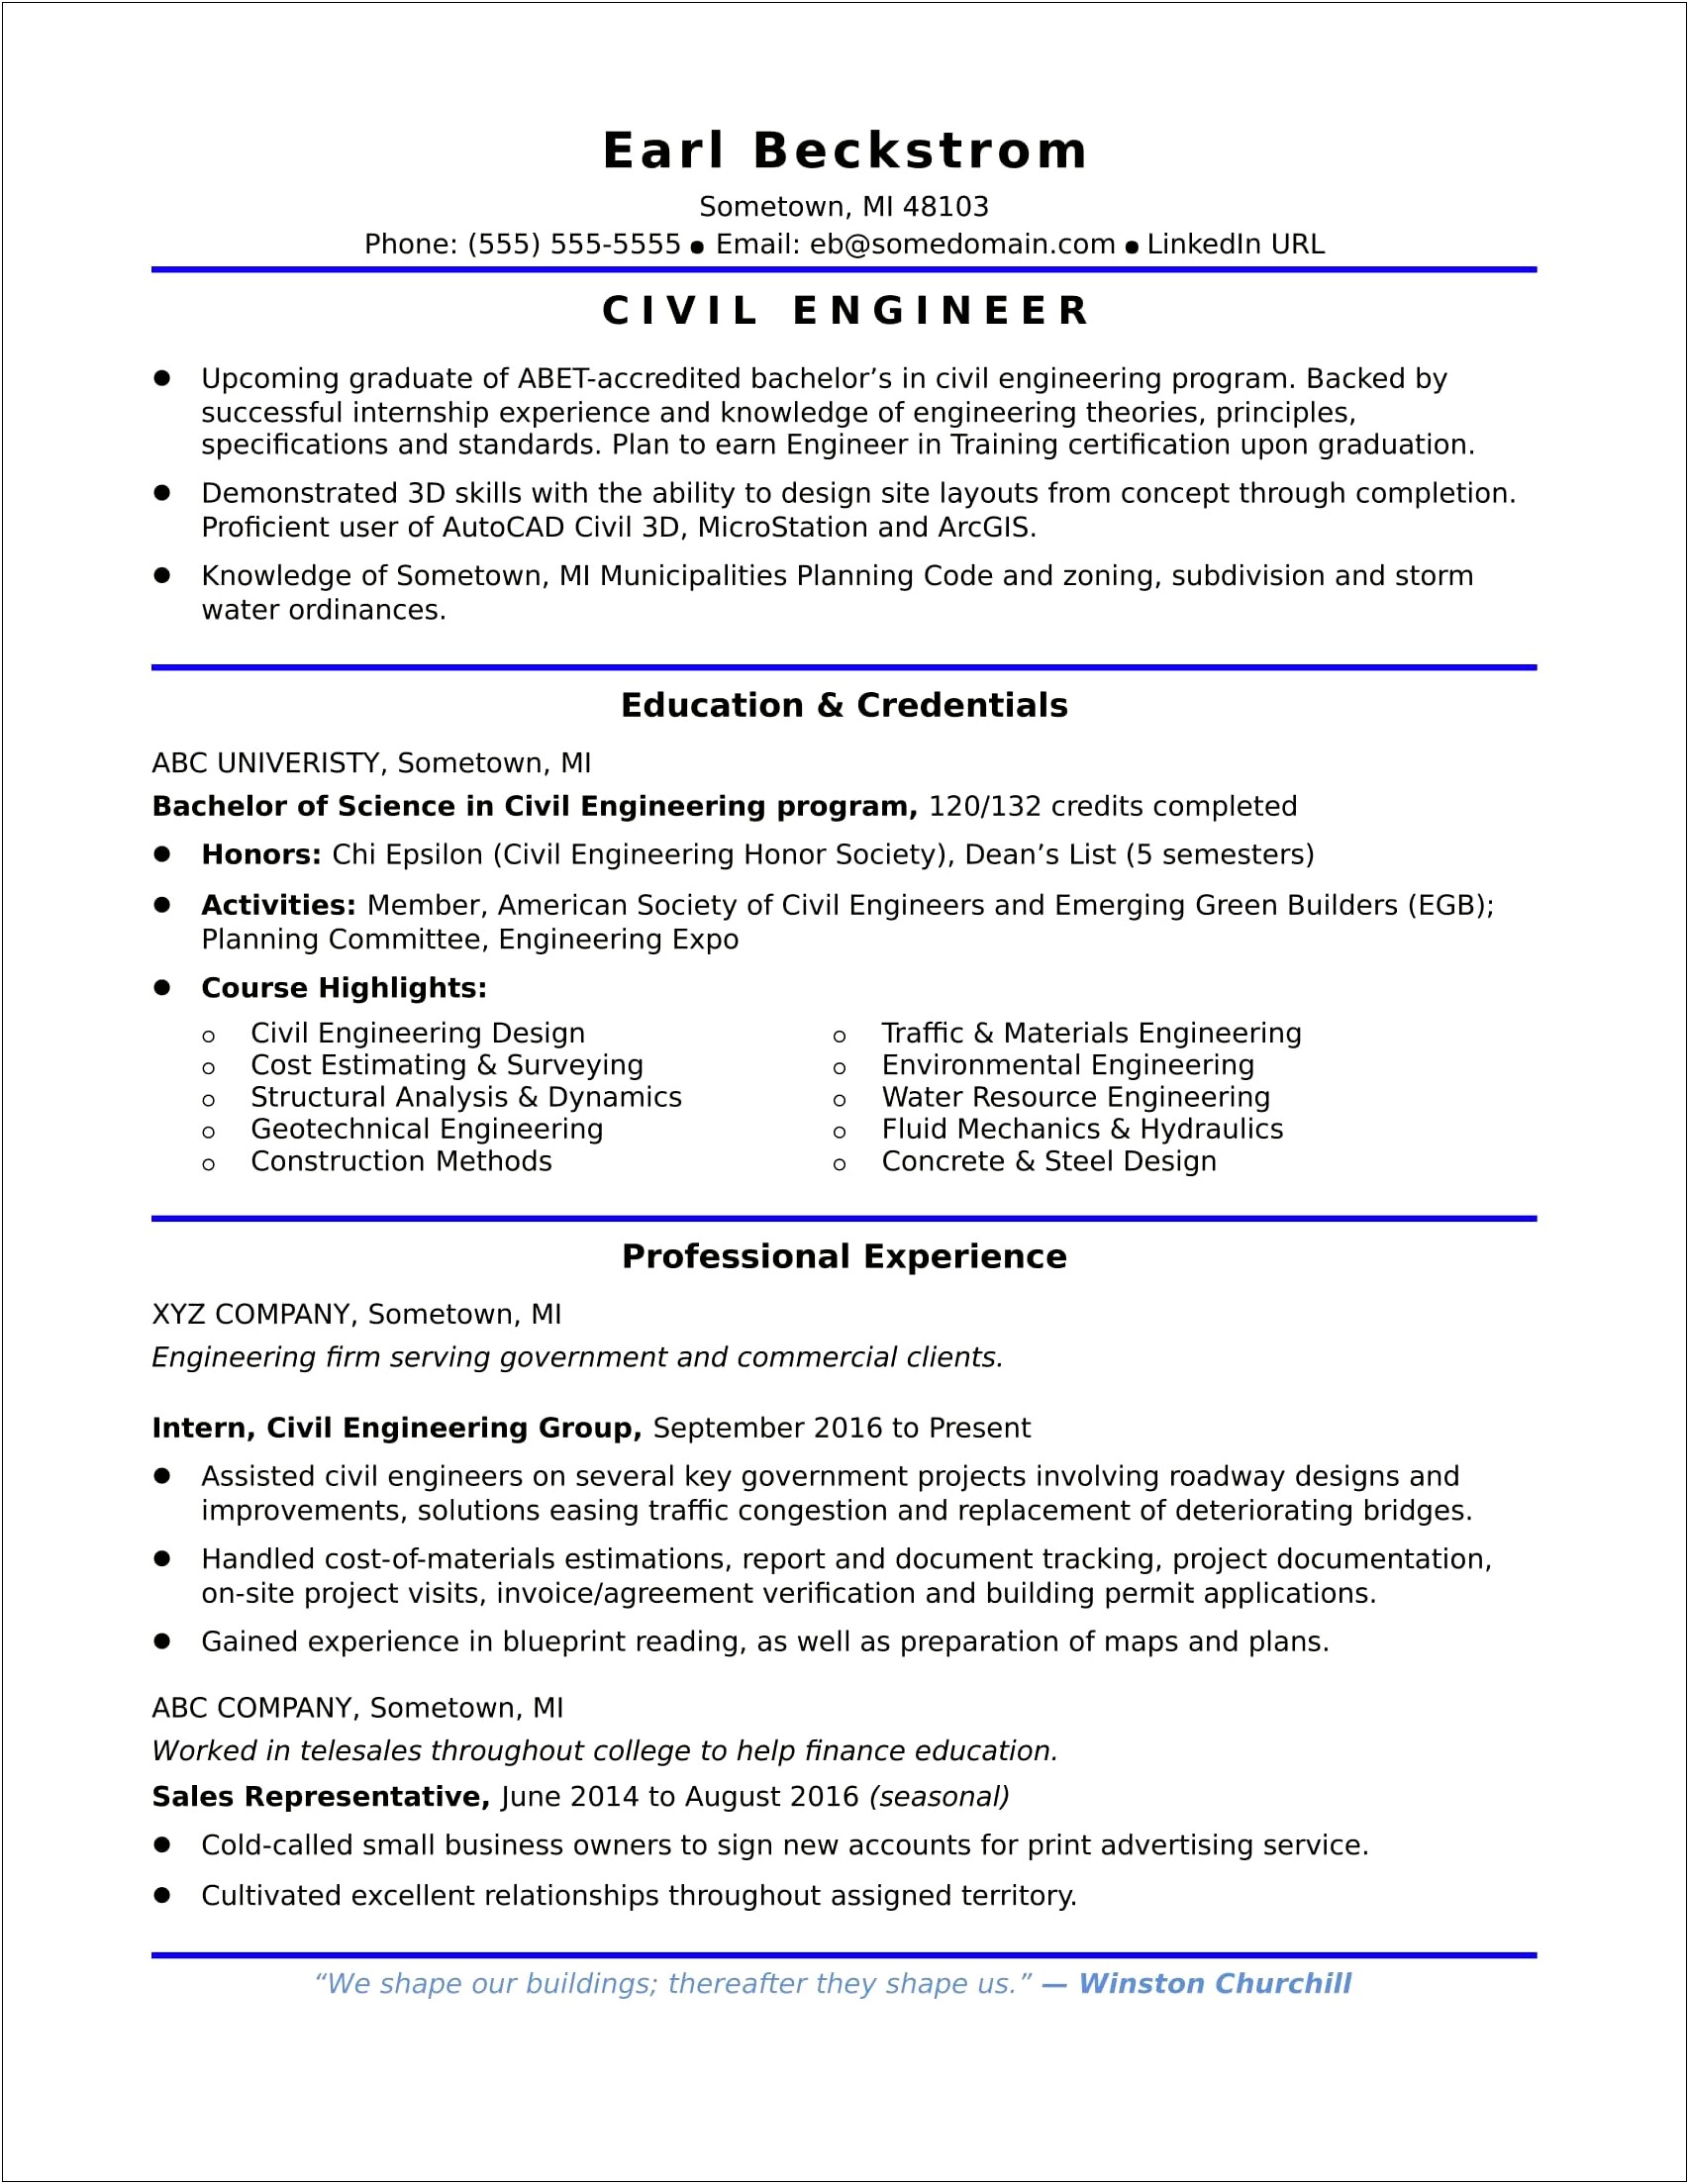 Resume Design For Only Entry Level Experience